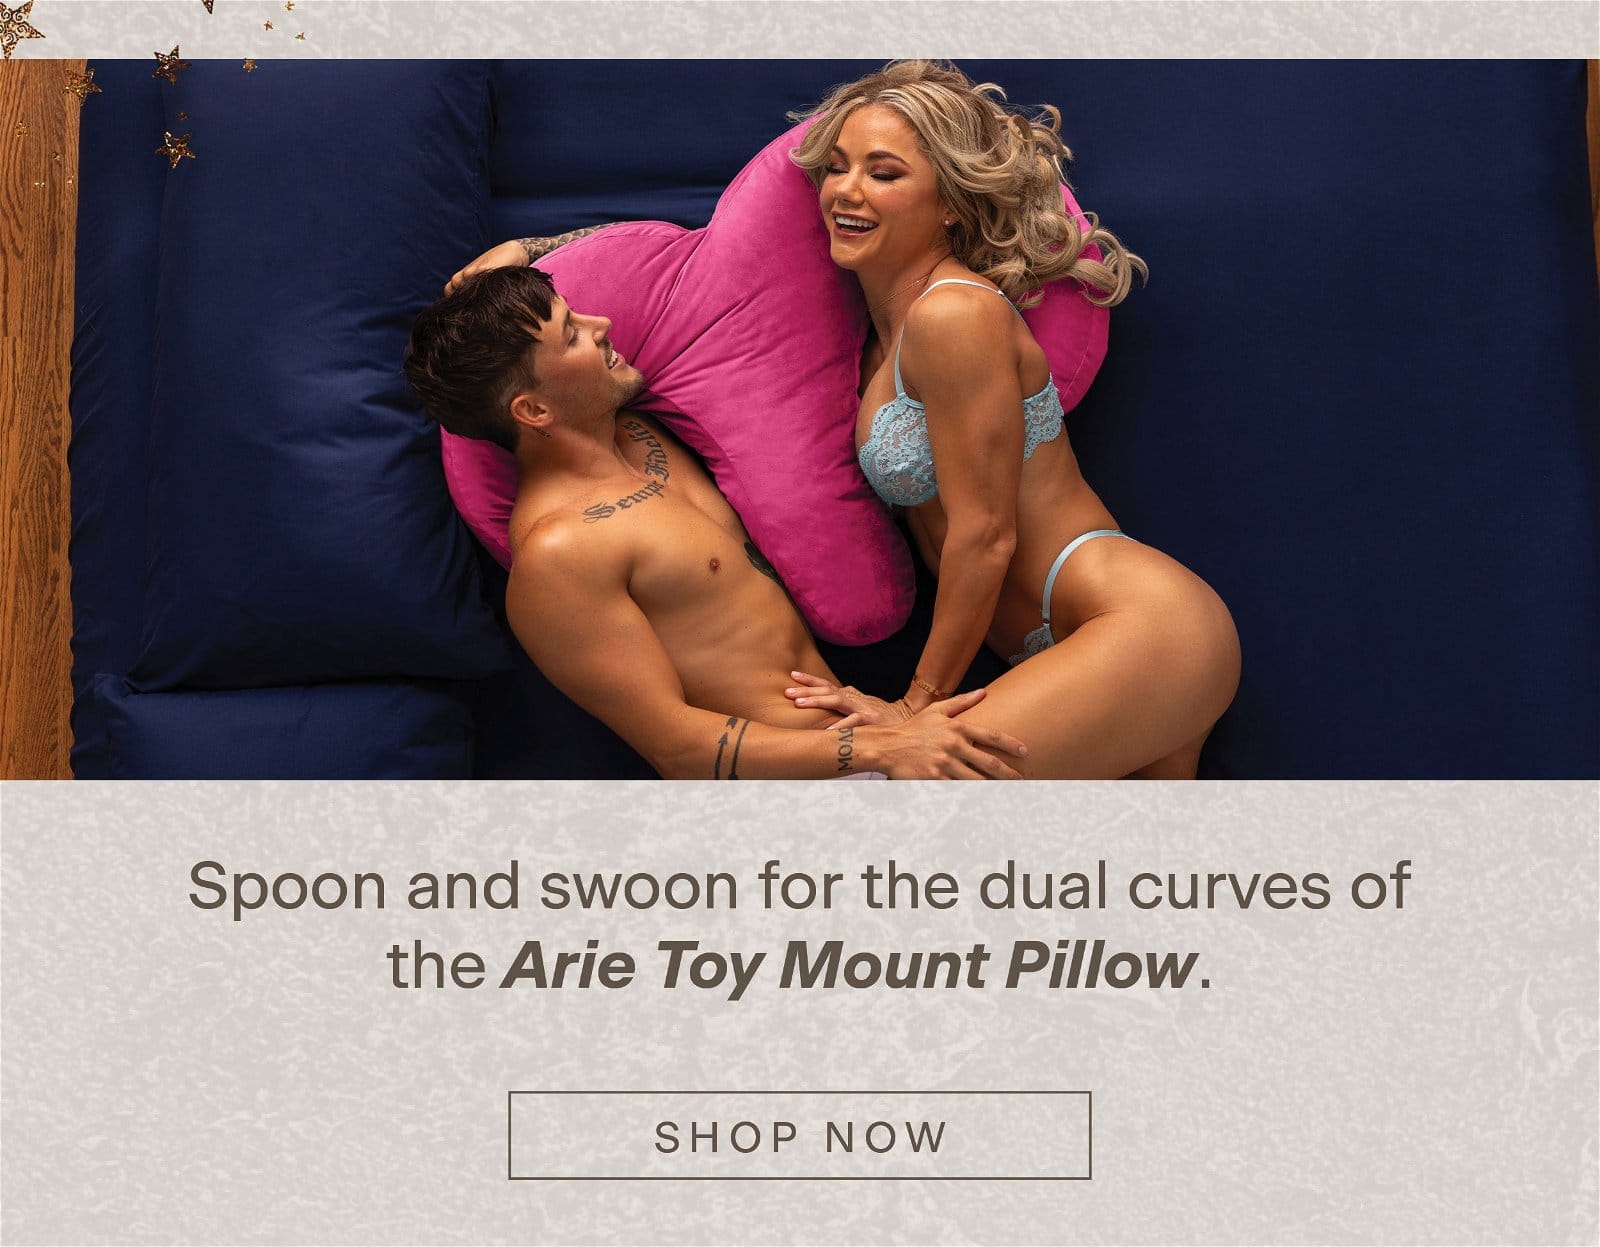 Arie – Spoon and swoon for the dual curves of the Arie Toy Mount Pillow.